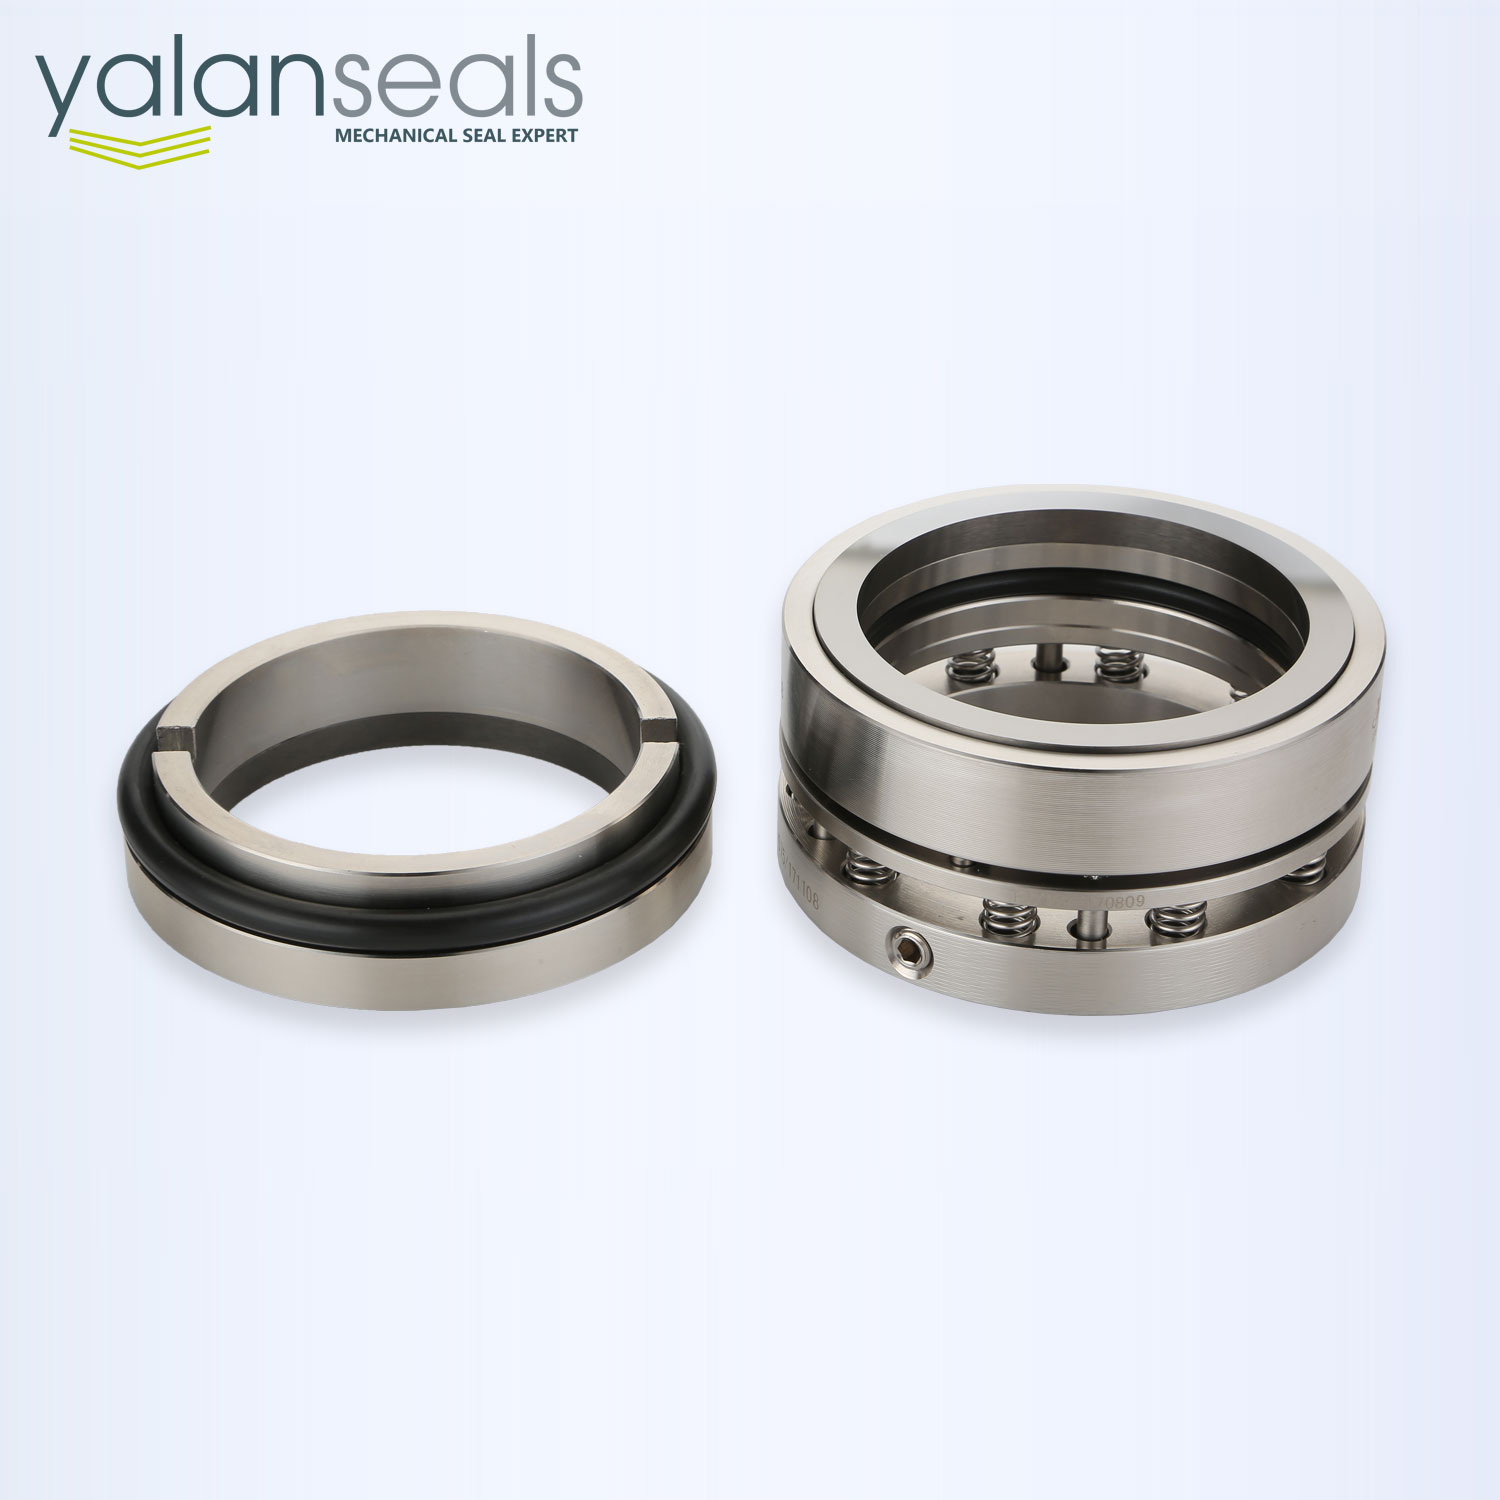 105 Mechanical Seal for Chemical Centrifugal Pumps, Screw Pumps, and Sewage Pumps